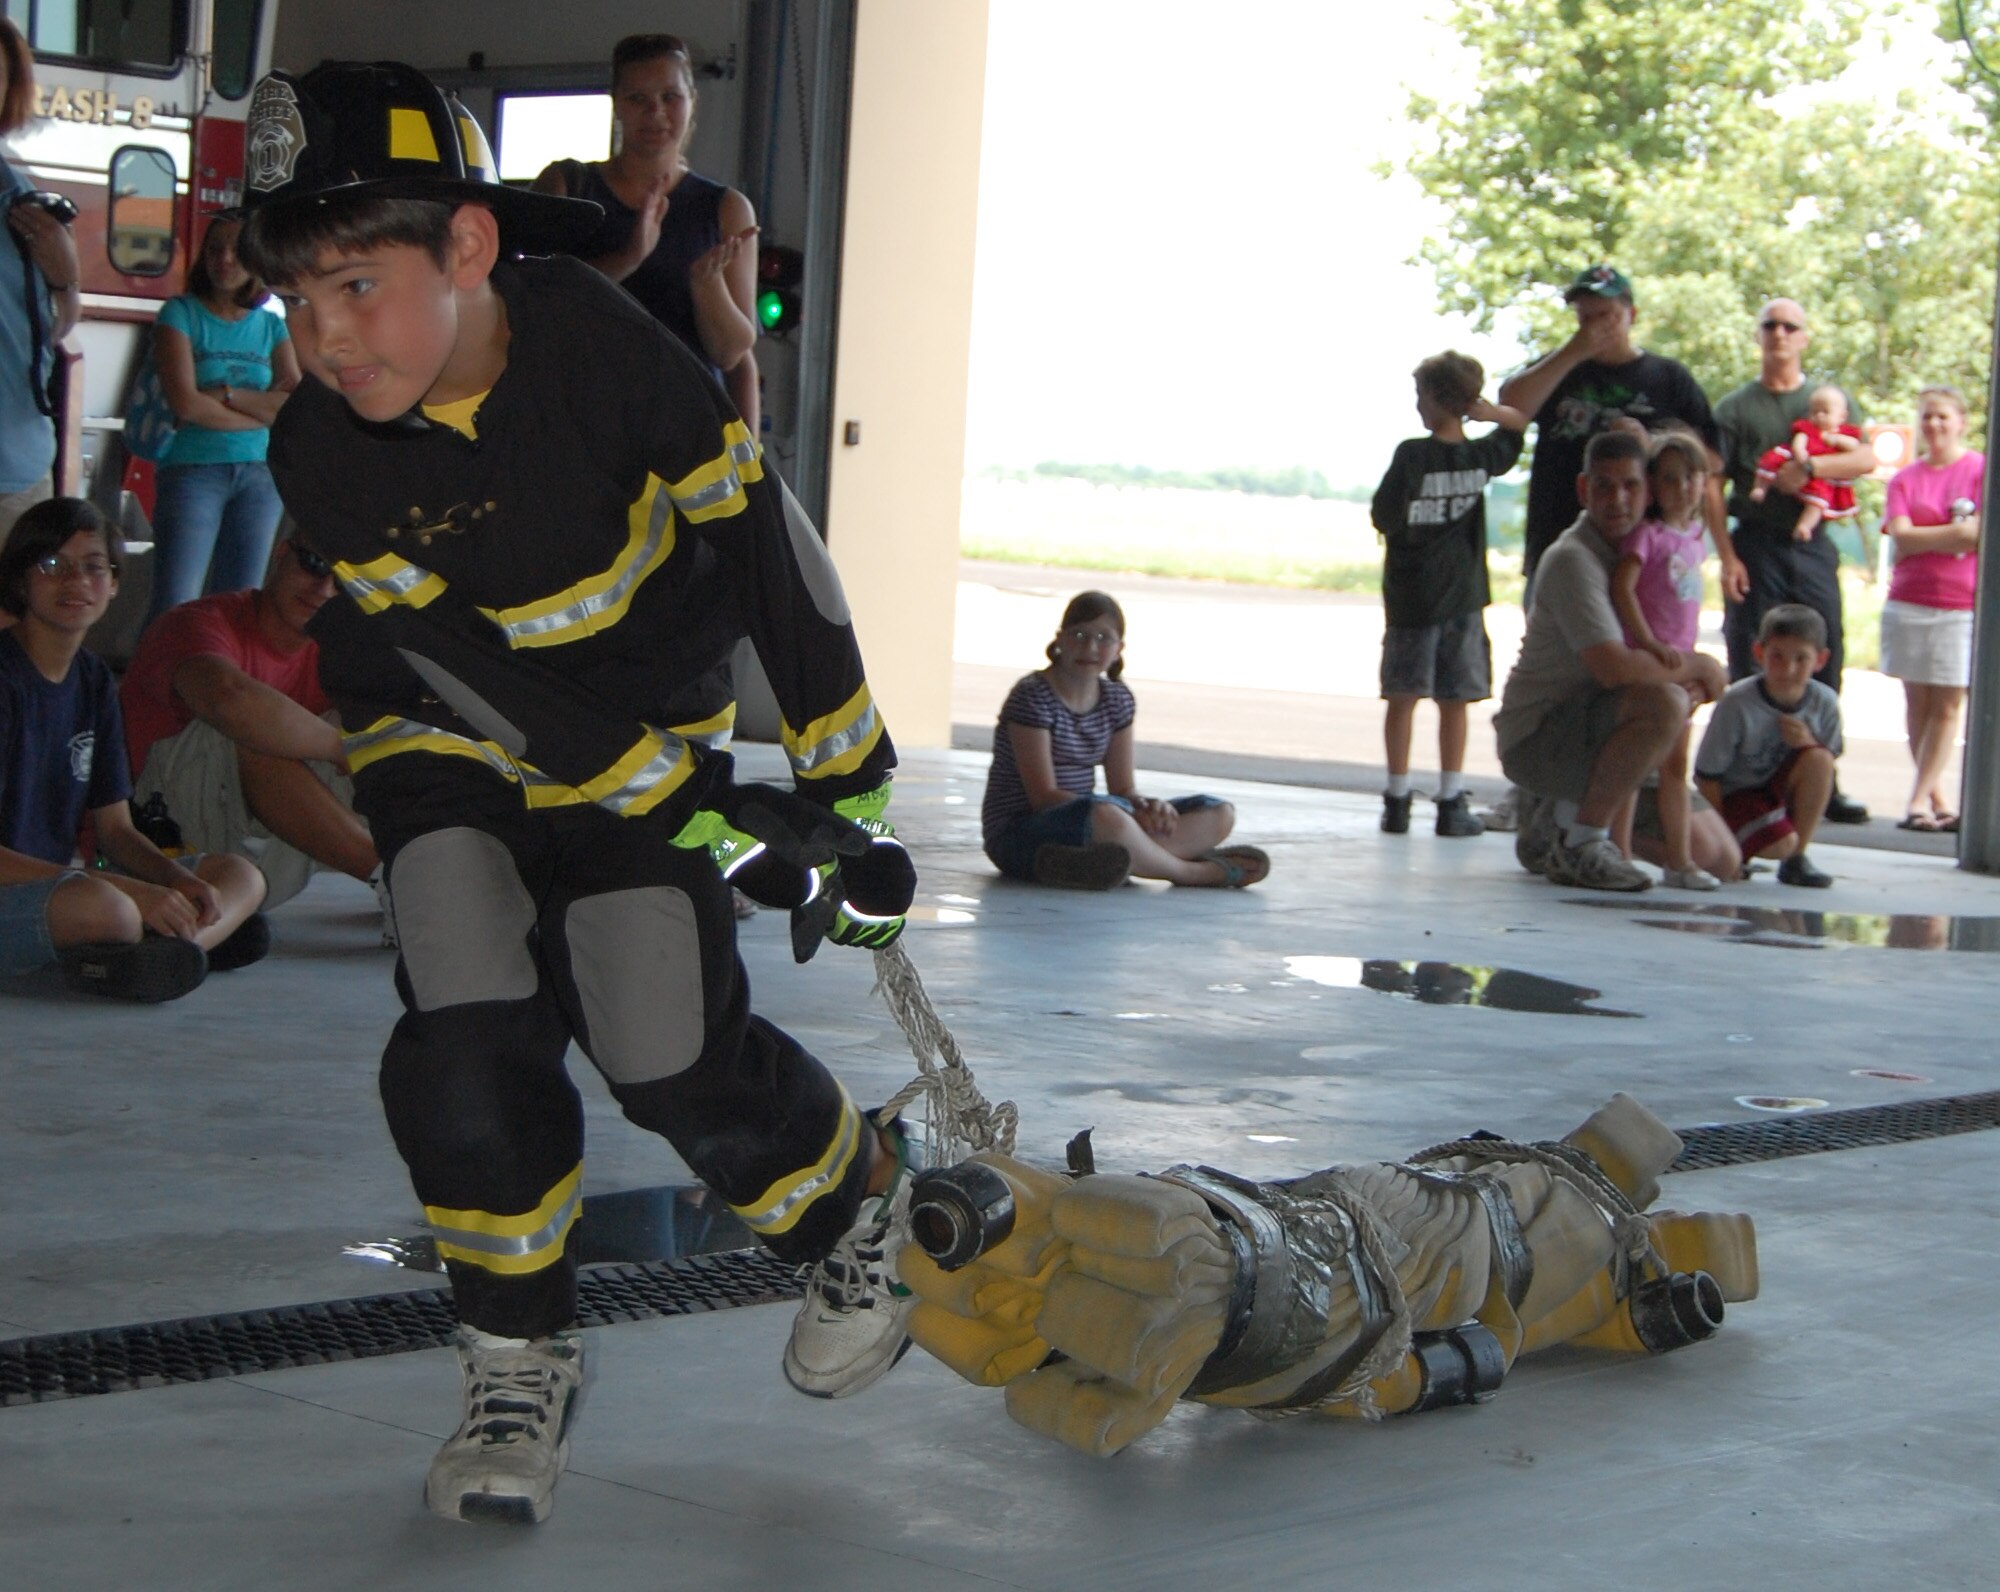 Yellow Team member Brandon Springer drags a simulated person to a nearby stretcher during the Aviano Fire Camp relay competition July 3, 2009. The week-long camp, which was open to 10-13-year-old base children, taught attendees basic firefighter knowledge and skills. (U.S. Air Force photo/Staff Sgt. Lindsey Maurice)